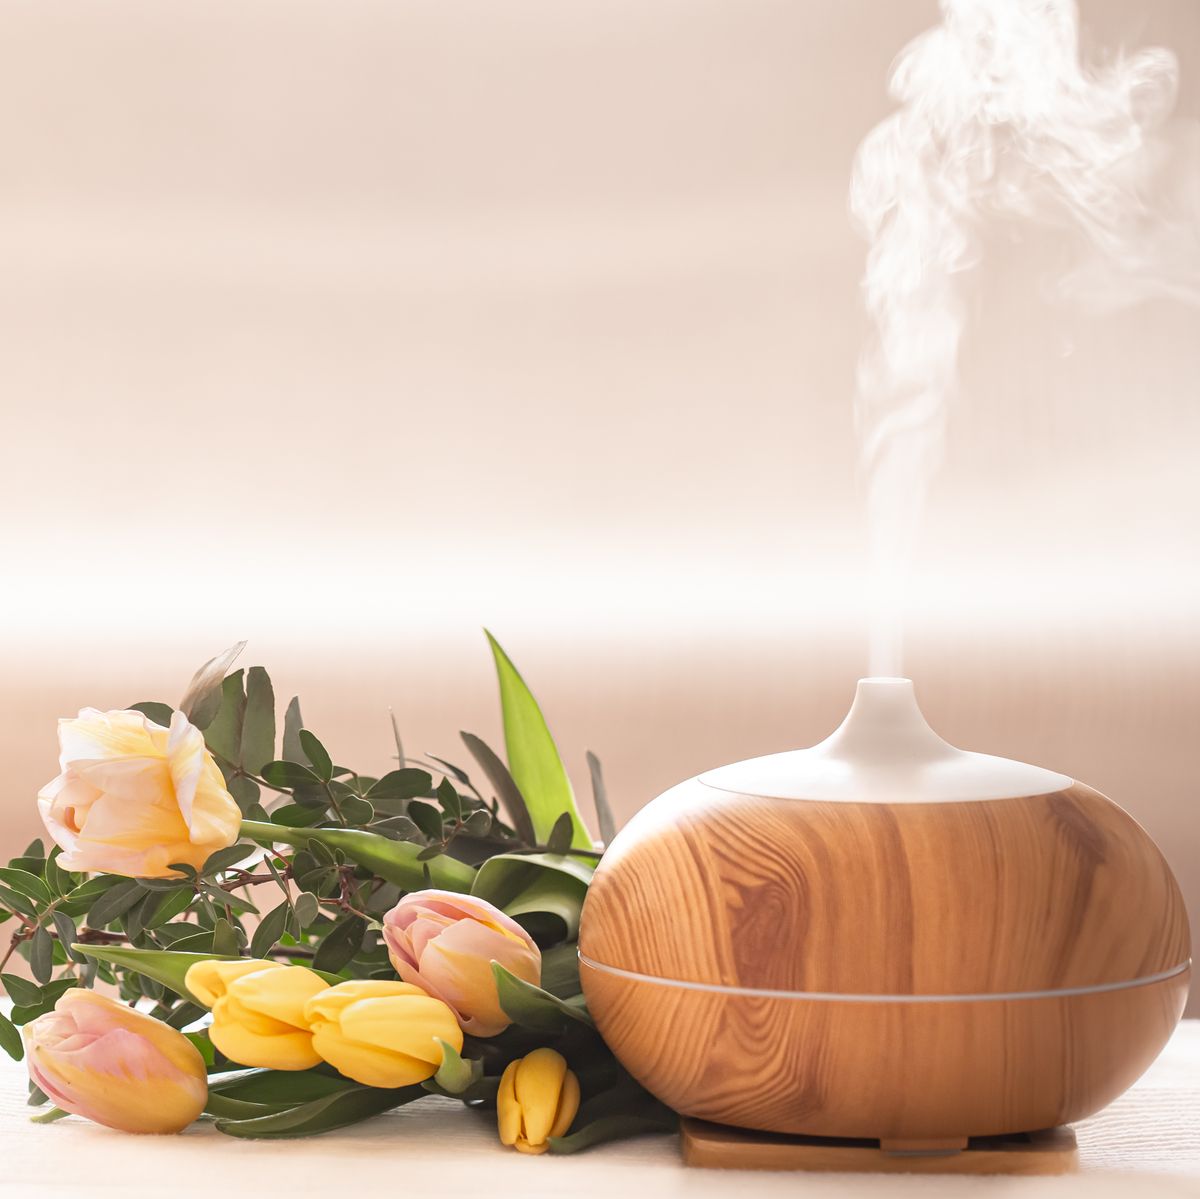 aroma oil diffuser lamp on the table